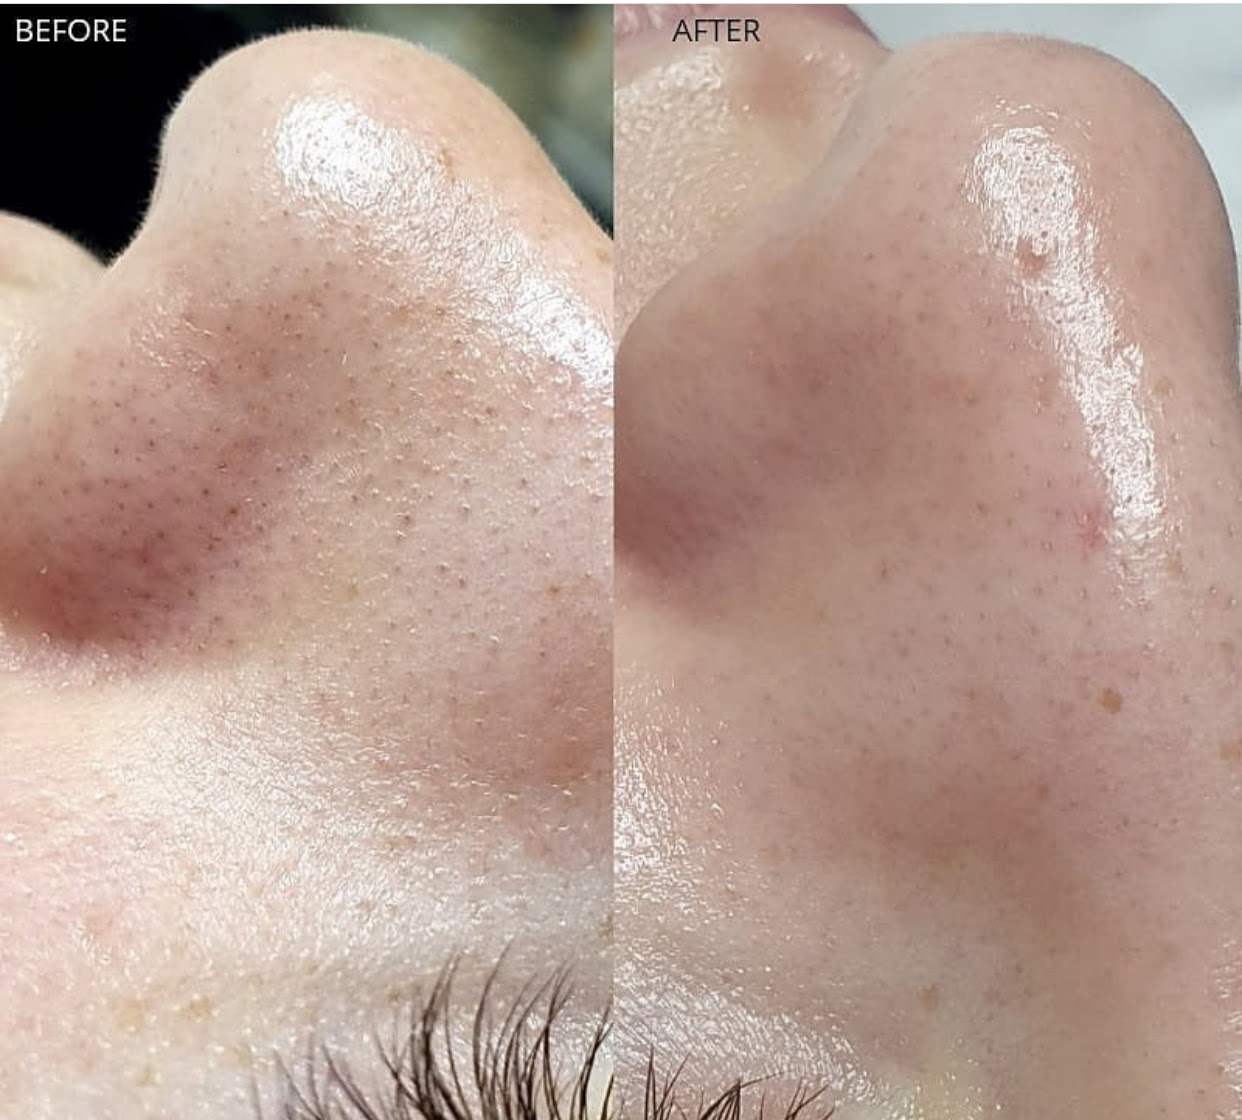 hydrafacial clears out blackheads in Belle Meade, TN.